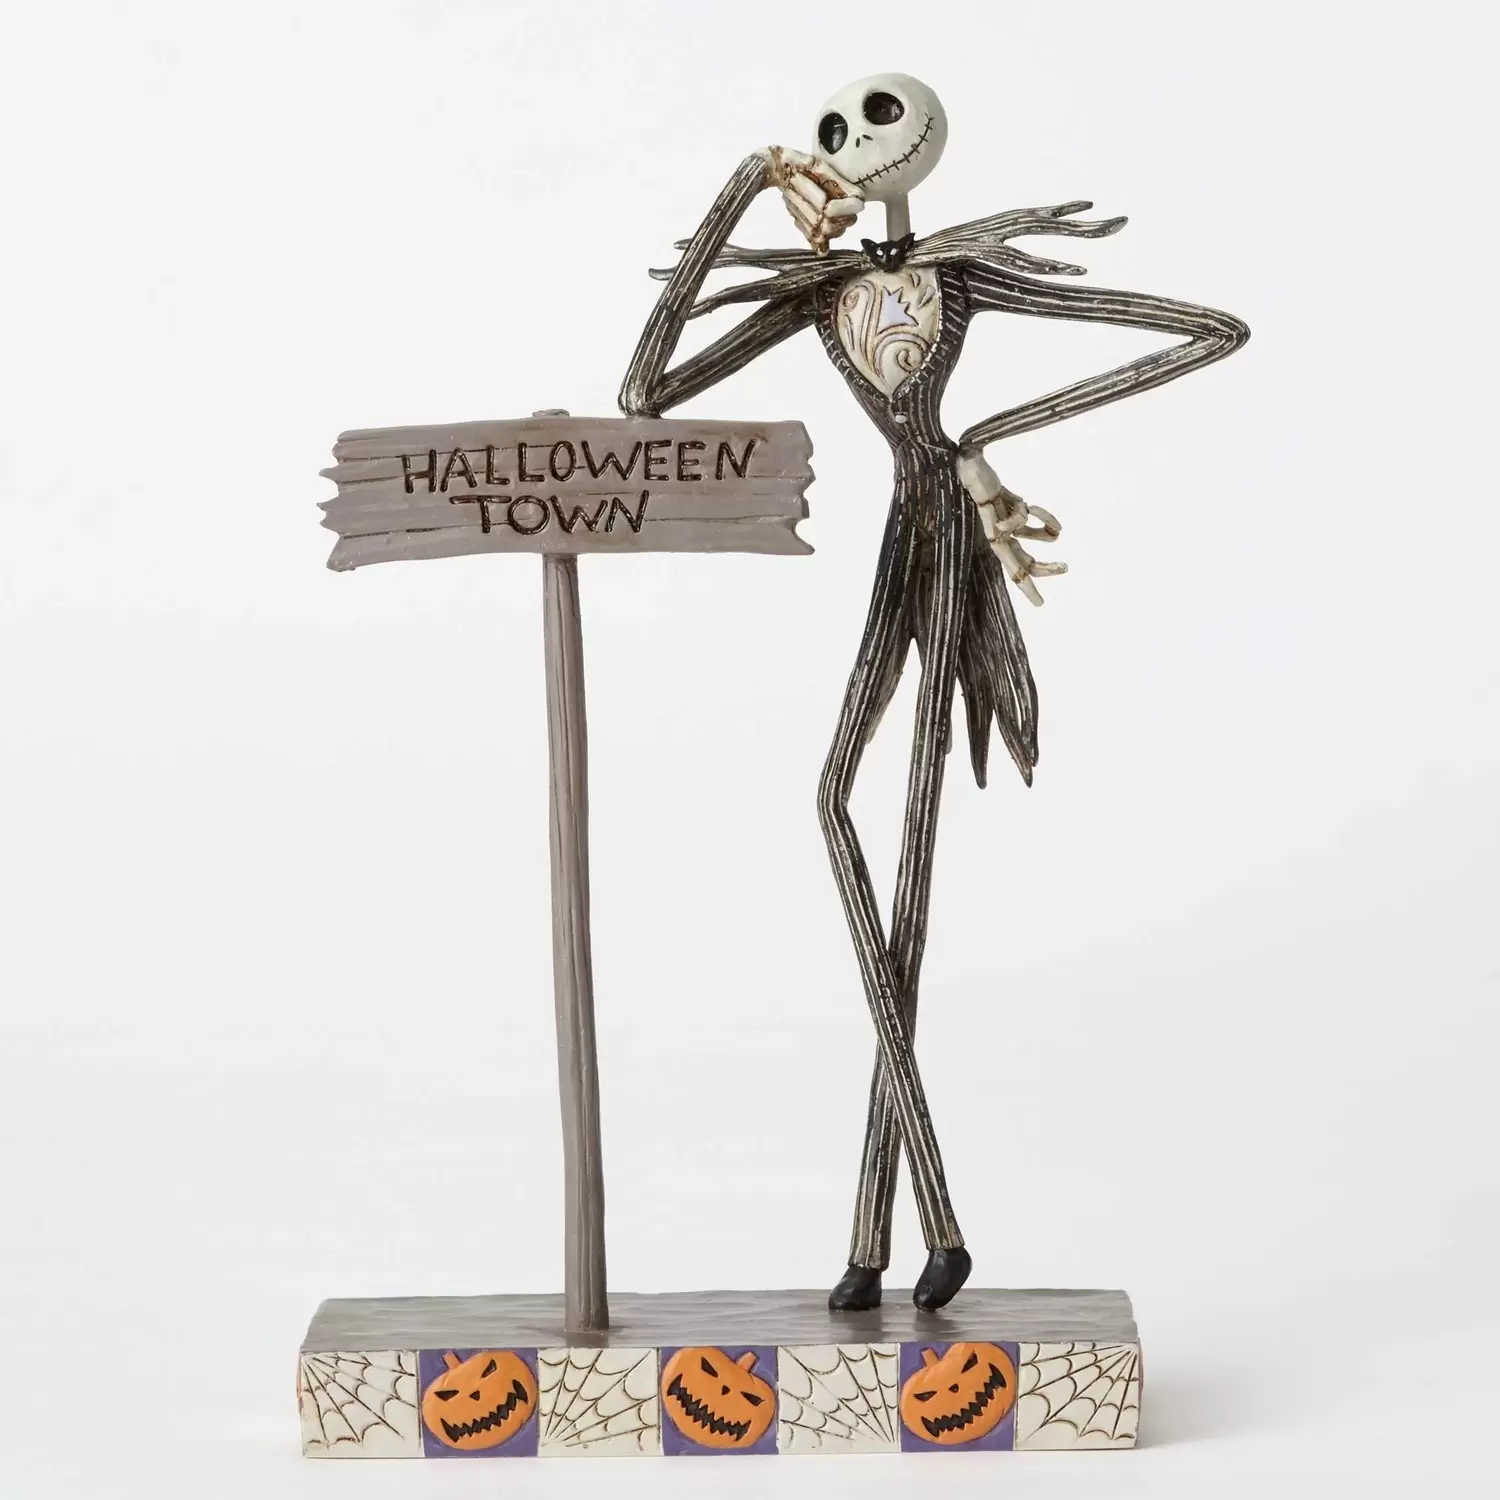 Disney Traditions by Jim Shore - Welcome to Halloween Town - Jack Skellington